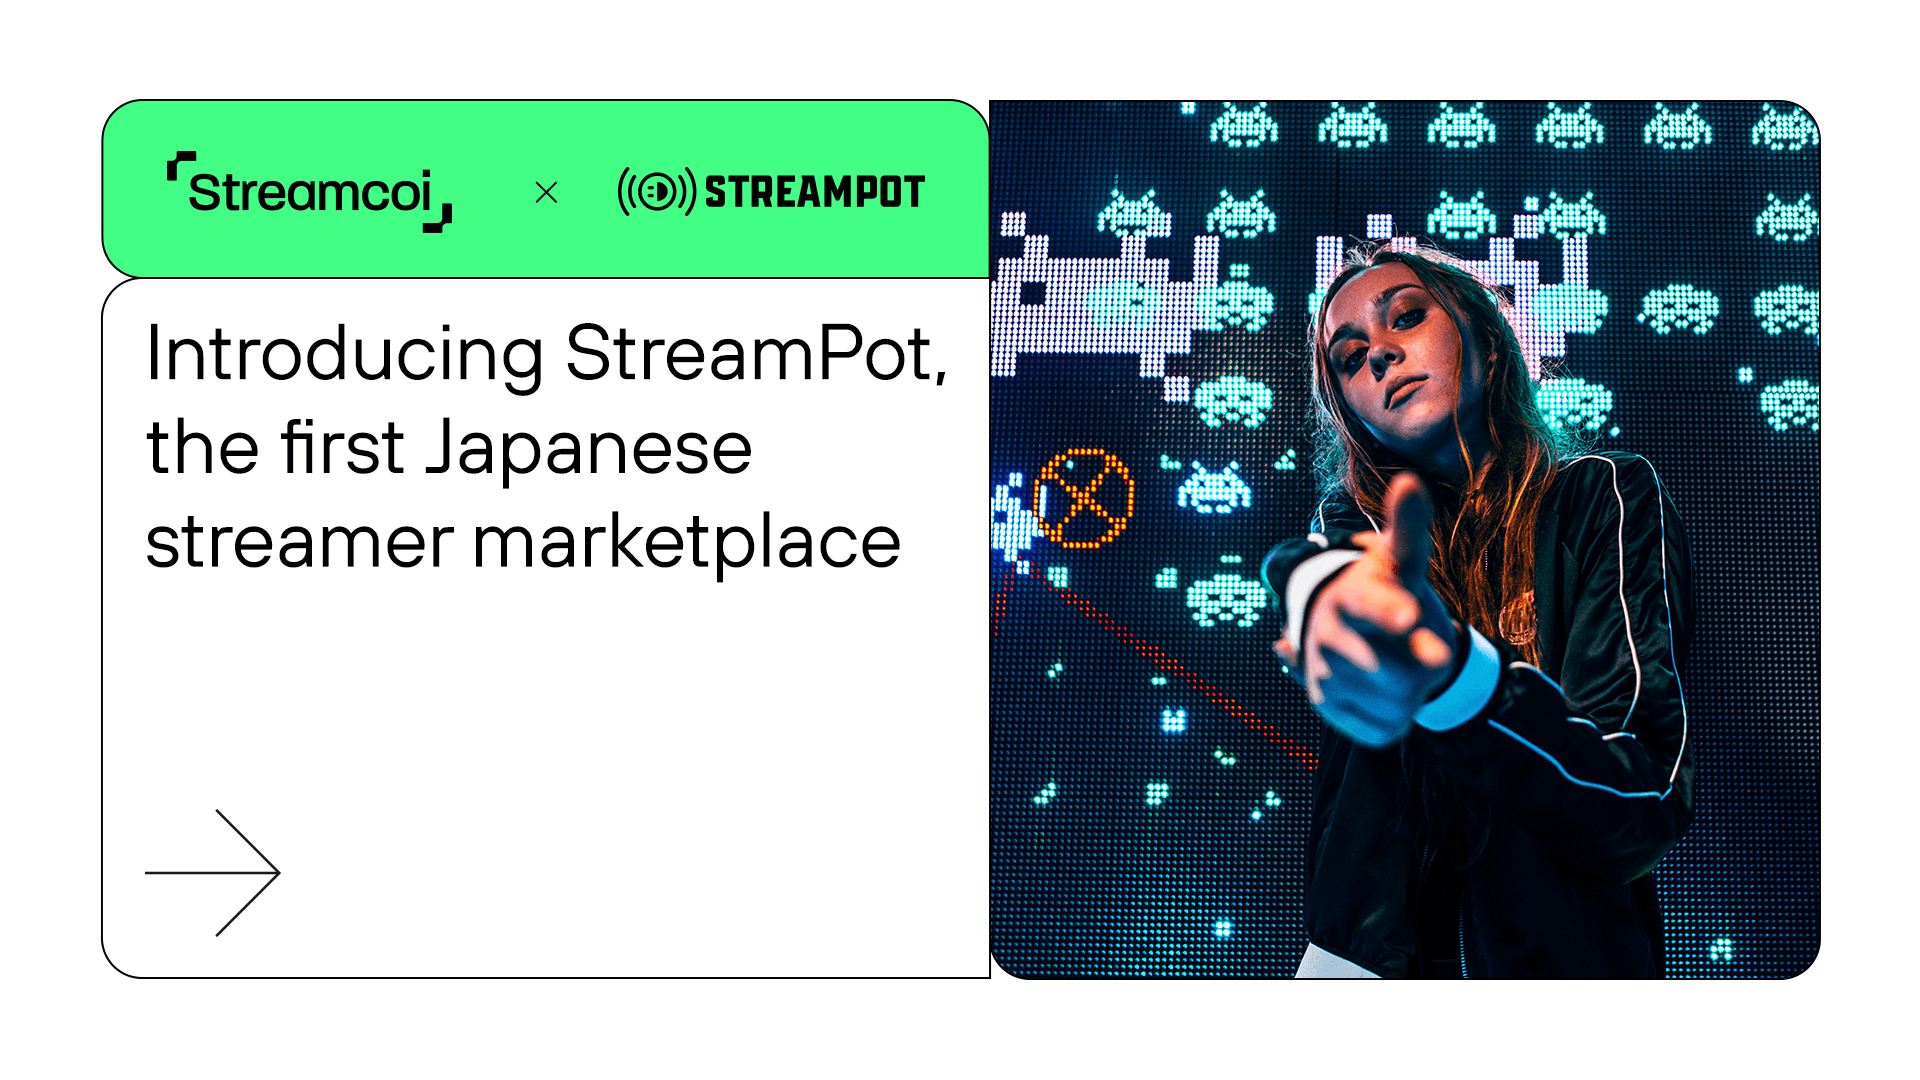 Introducing StreamPot: Japan's first streamer marketplace by TechnoBlood eSports and Streamcoi